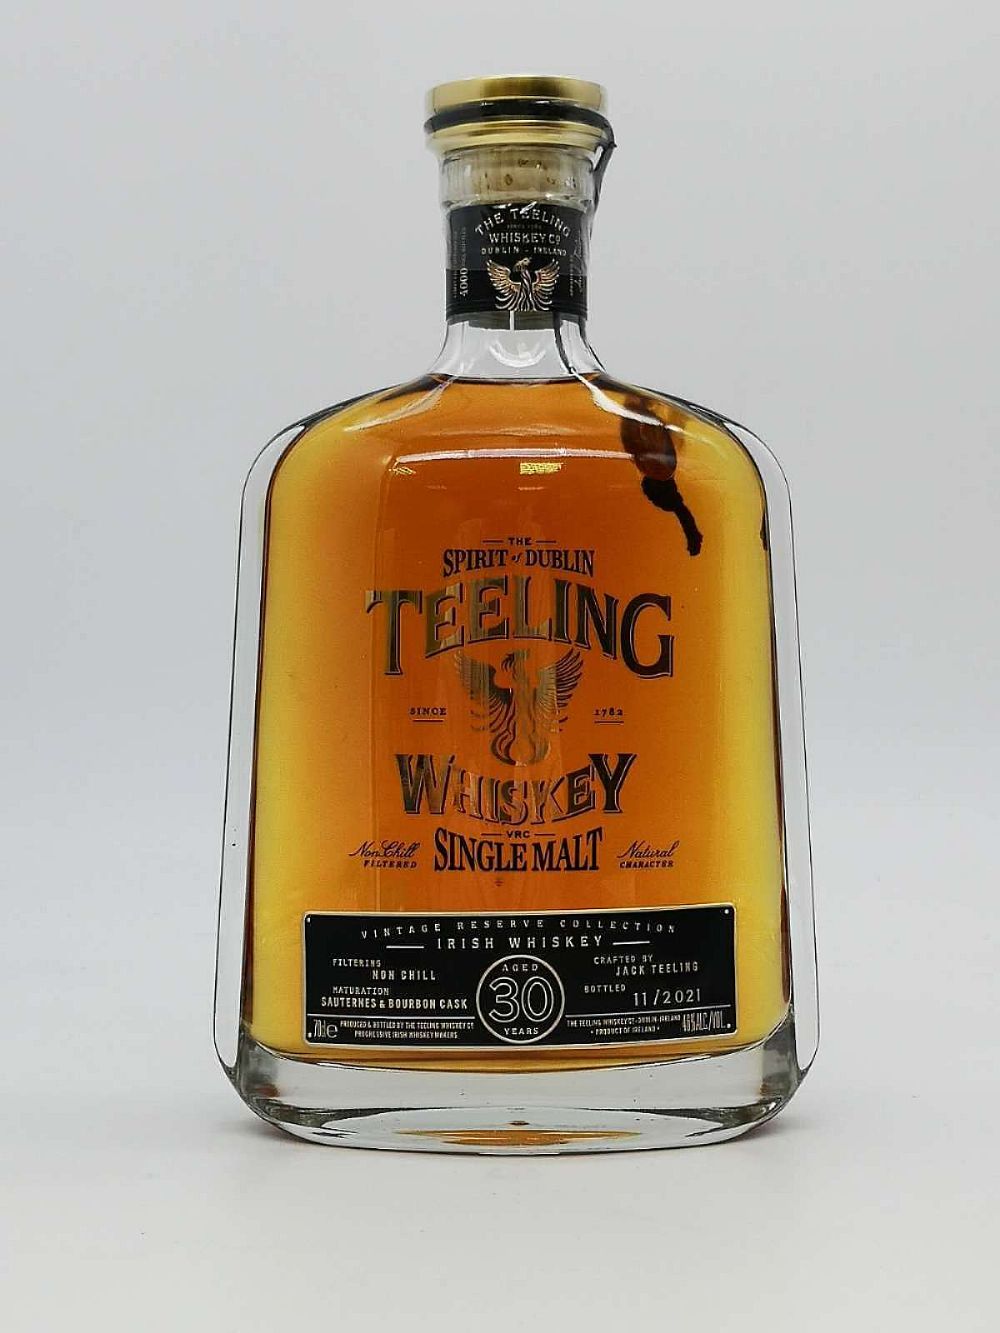 Teeling 30 year old, Vintage Reserve Collection, Sauternes and Bourbon Cask